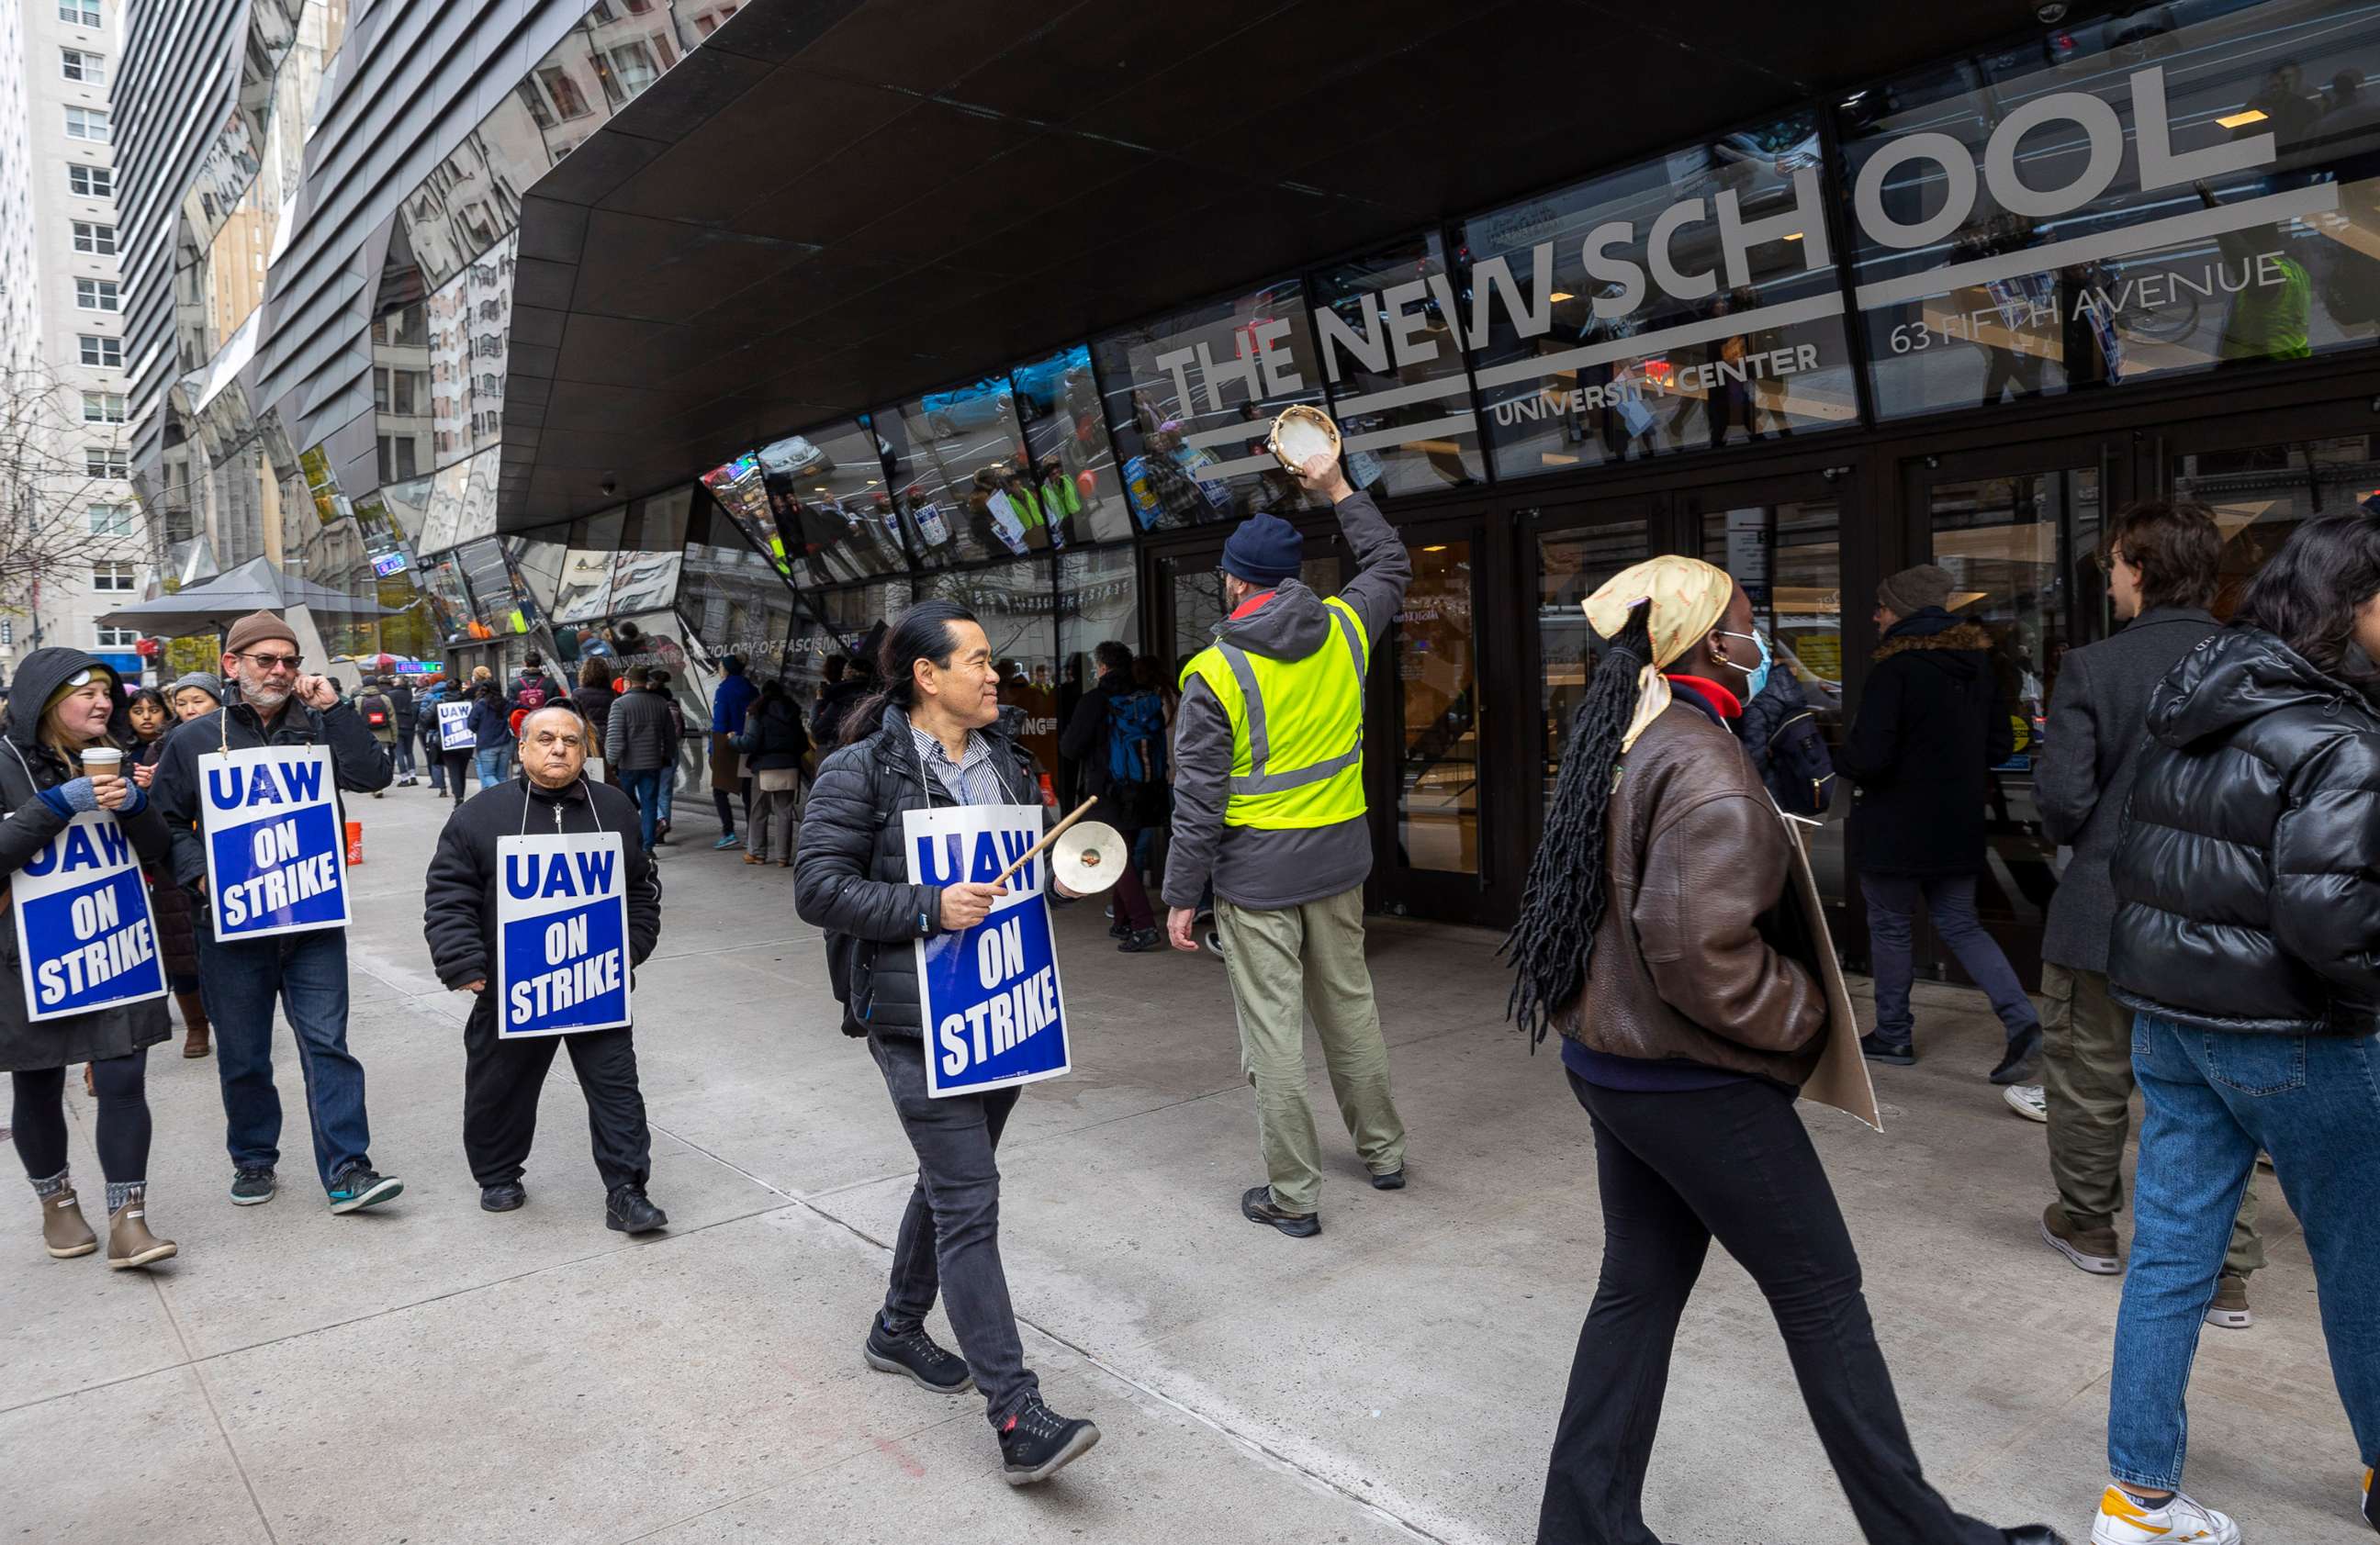 PHOTO: Strikers wear signs that read ''UAW On Strike'' on a picket line outside of the New School as part-time faculty continue to strike for job security and wage increases that keep up with the cost of living, on Nov. 29, 2022, in New York.